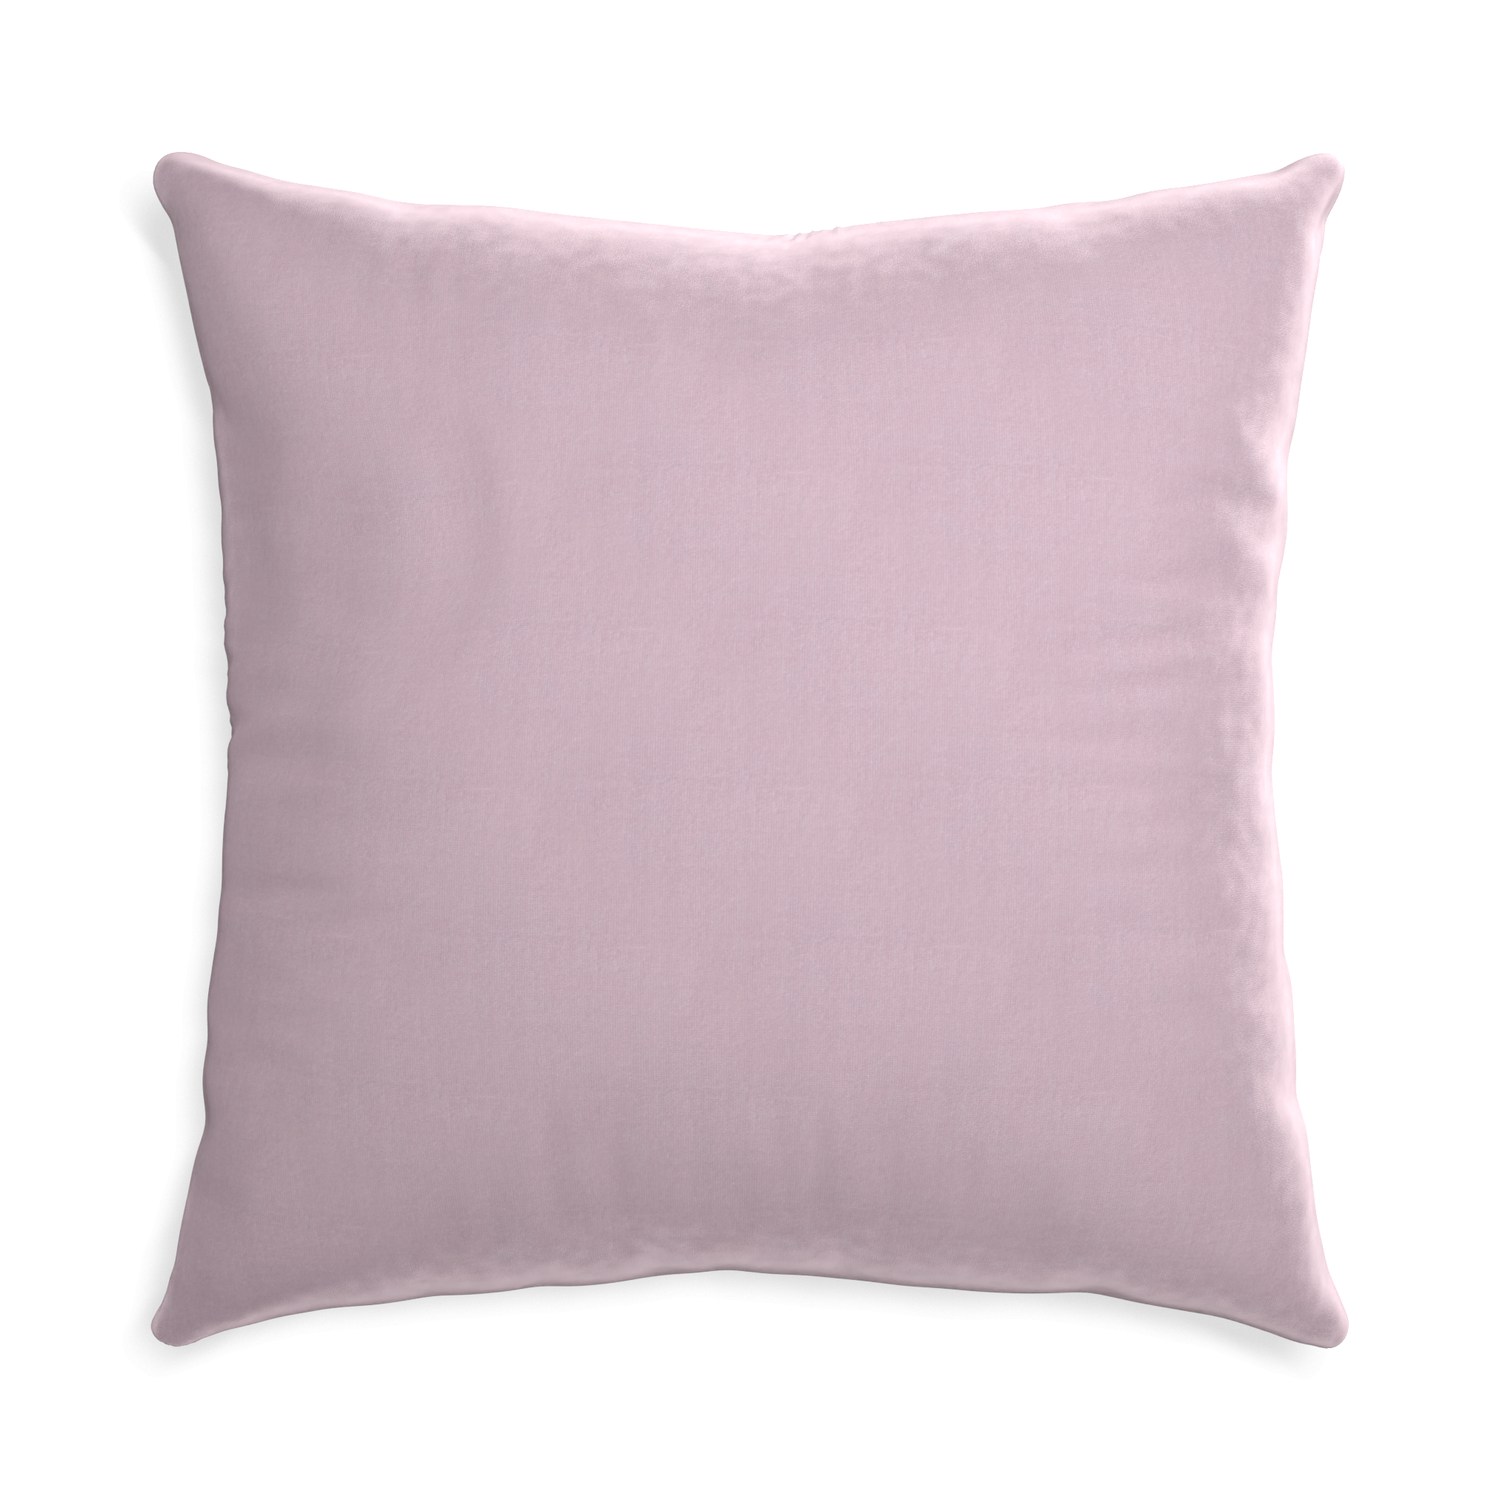 Euro-sham lilac velvet custom lilacpillow with none on white background